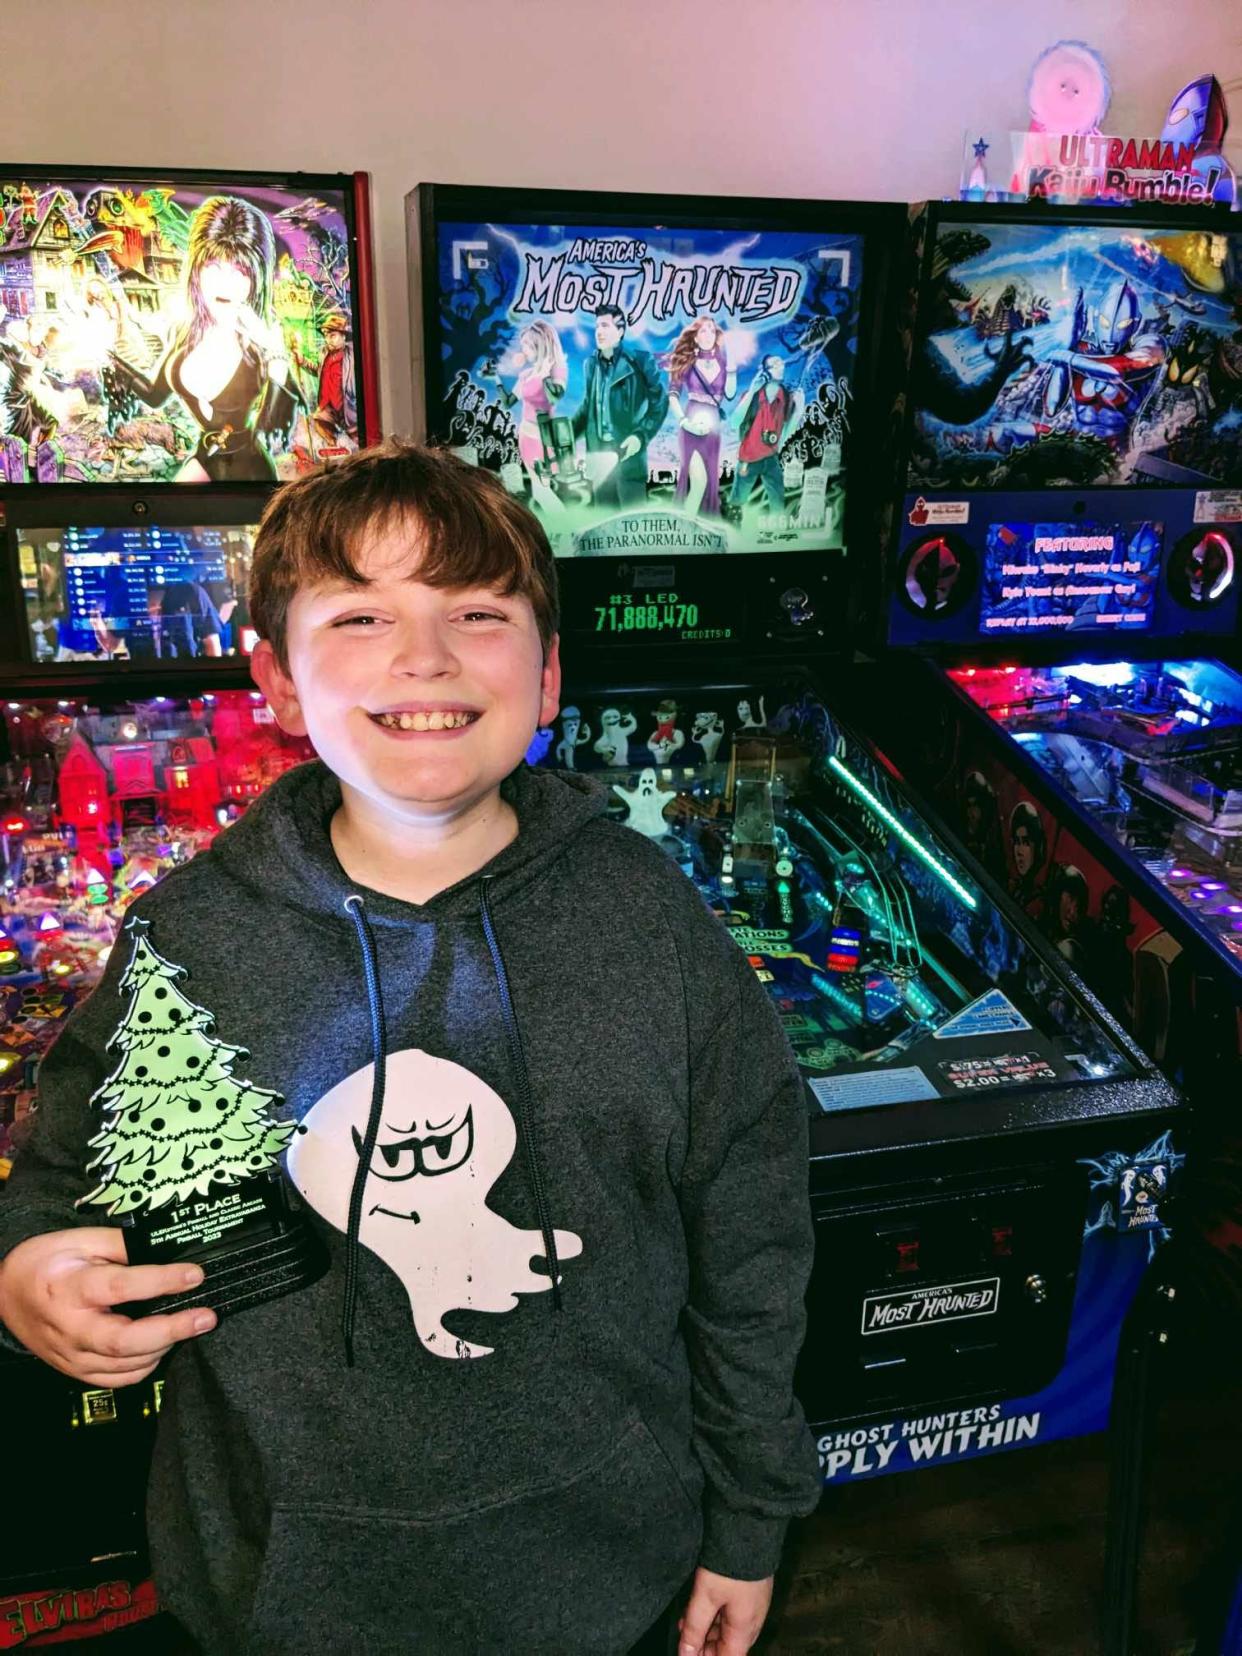 At the annual Holiday Extravaganza pinball tournament sponsored by ULEKstore’s Pinball and Classic Arcade inside the Mall of Monroe, Sterling Mitoska, 12, scored first place out of eight top finalists, walking away with a trophy and cash prize.